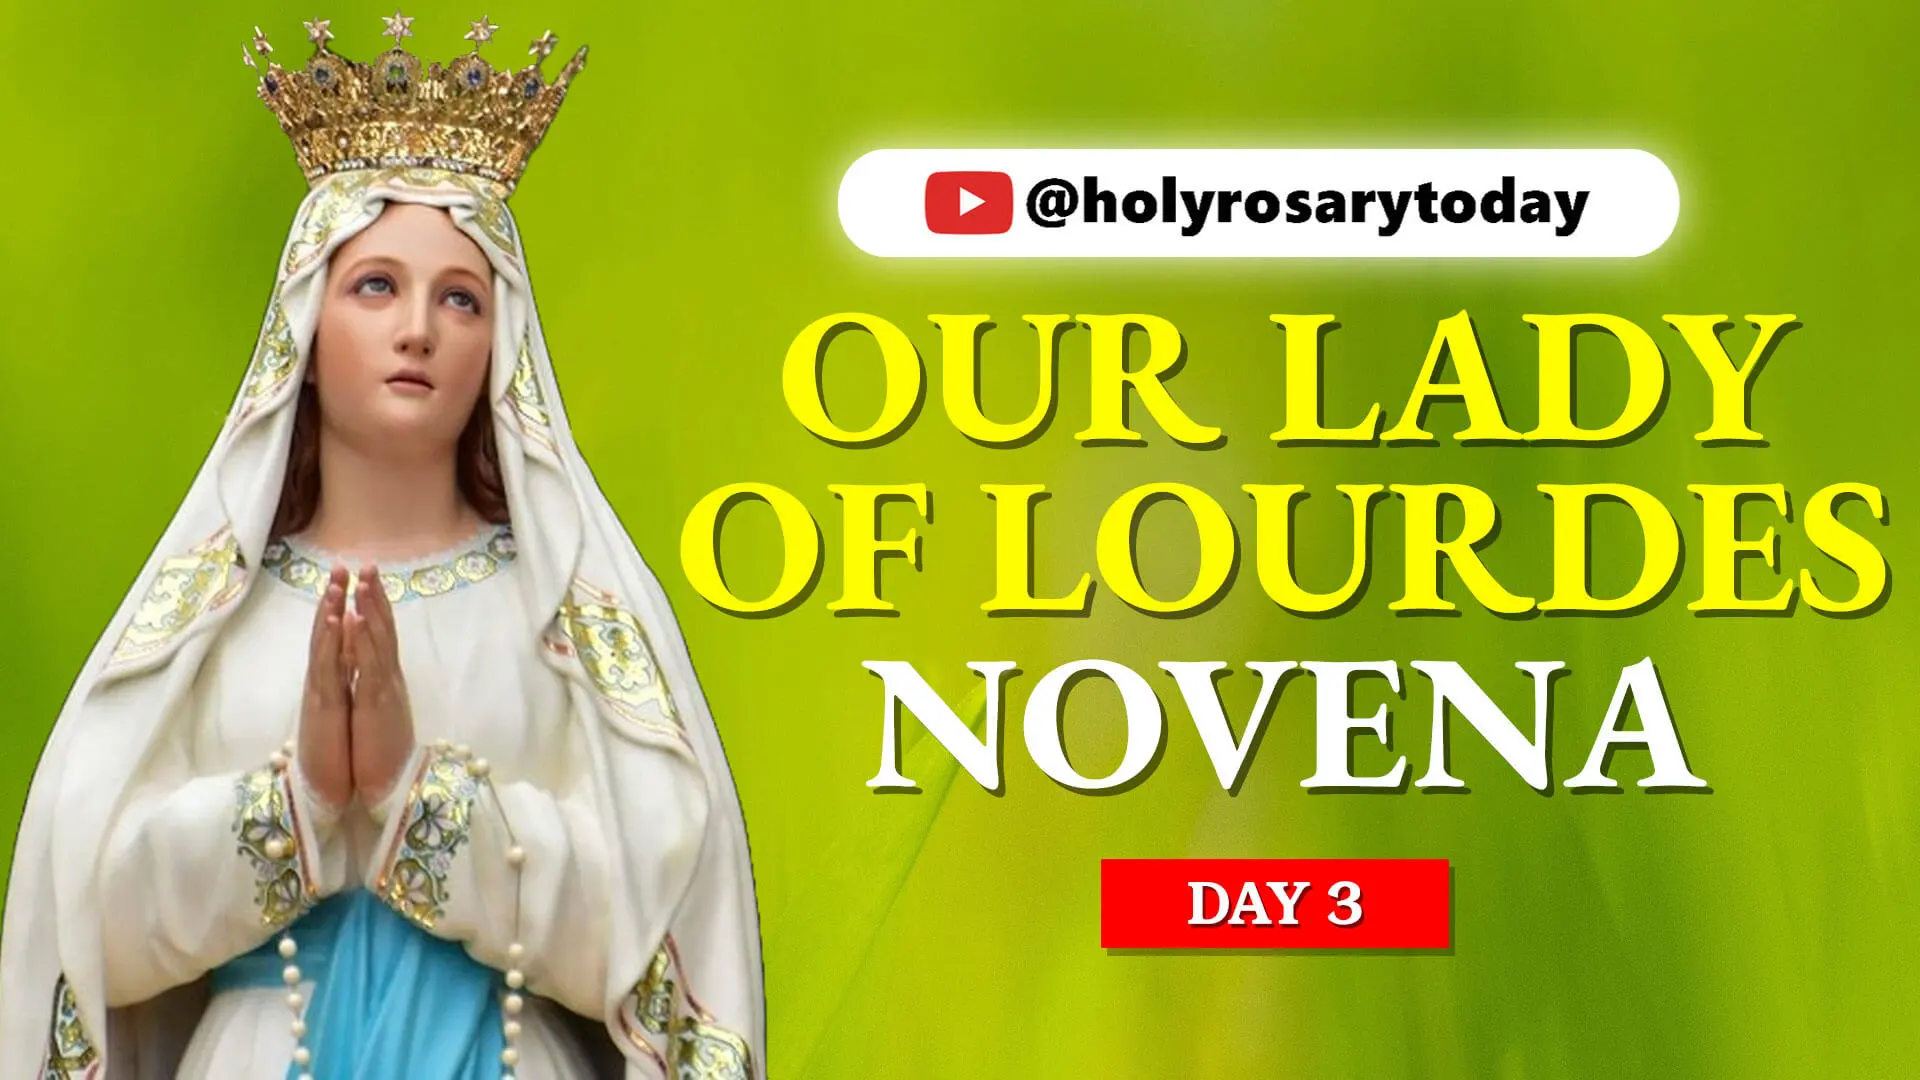 Our Lady of Lourdes Novena Day 3